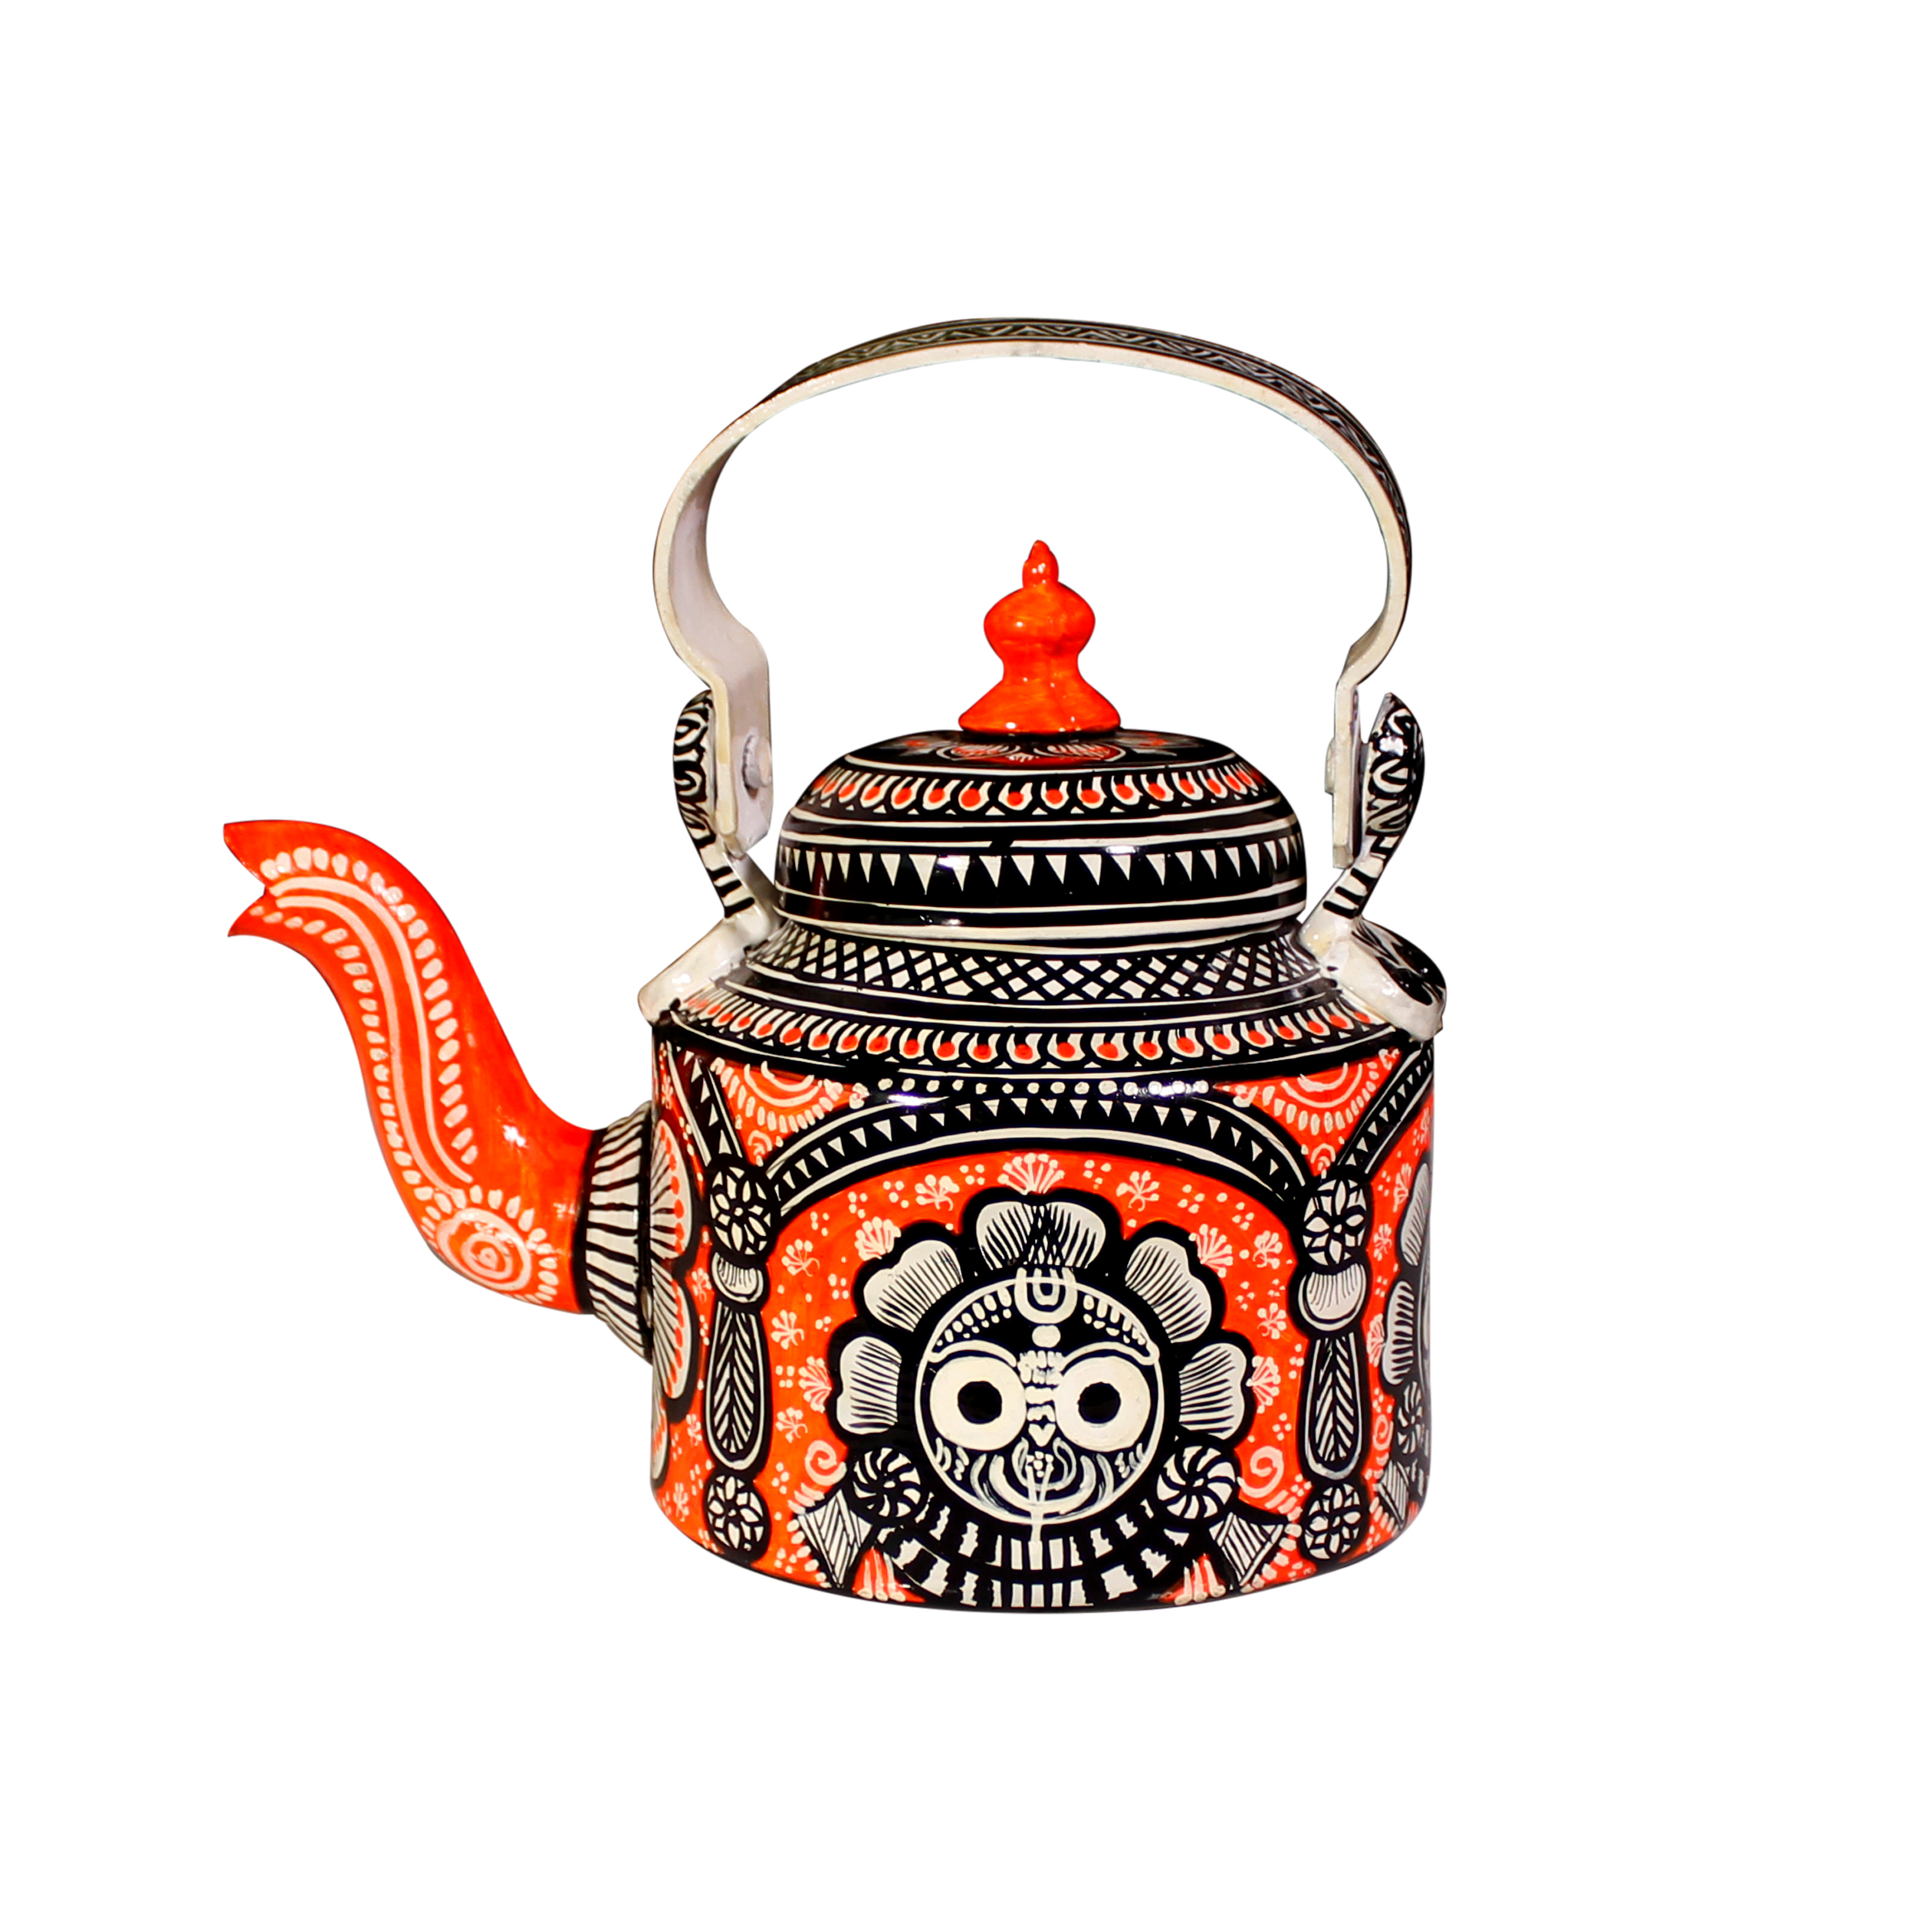 Ratha Yatra Themed Hand-Painted  Pattachitra Kettle